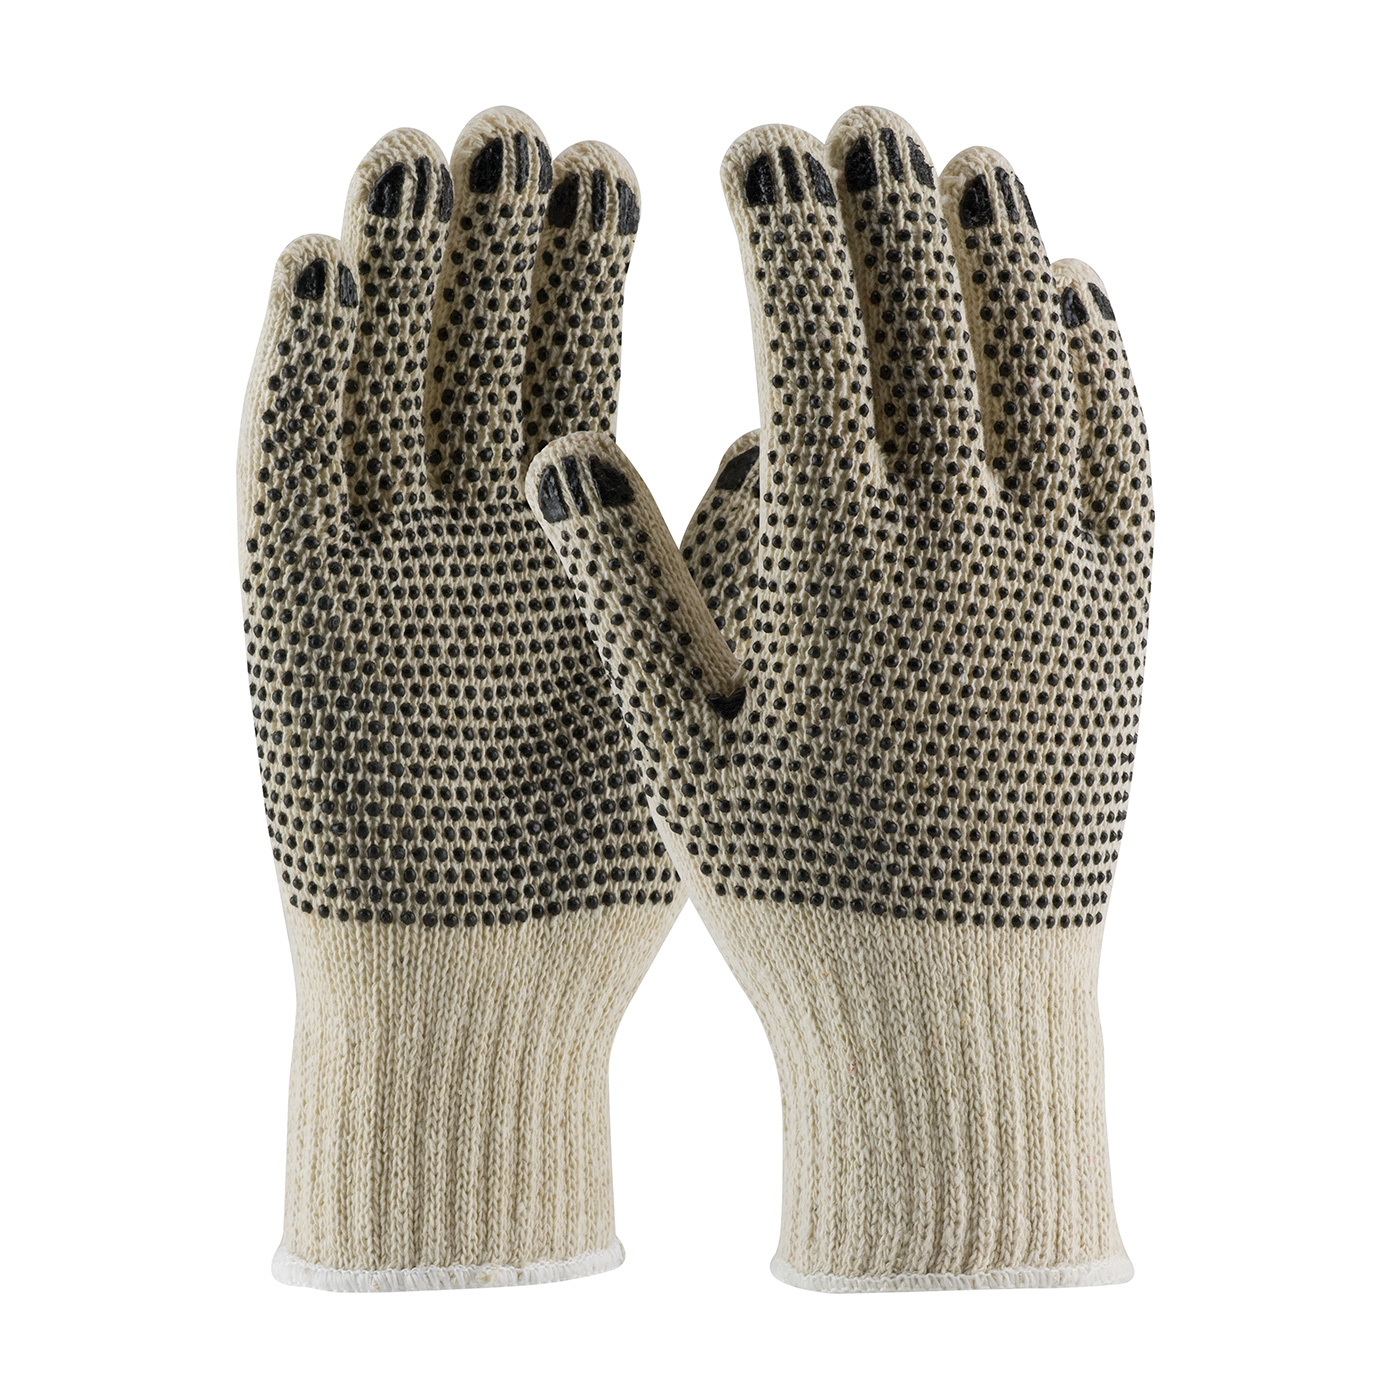 PIP 36-110PDD/L Seamless Knit Cotton/Polyester Glove with Double-Sided PVC Dot Grip - Regular Weight - Large PID-36 110PDD